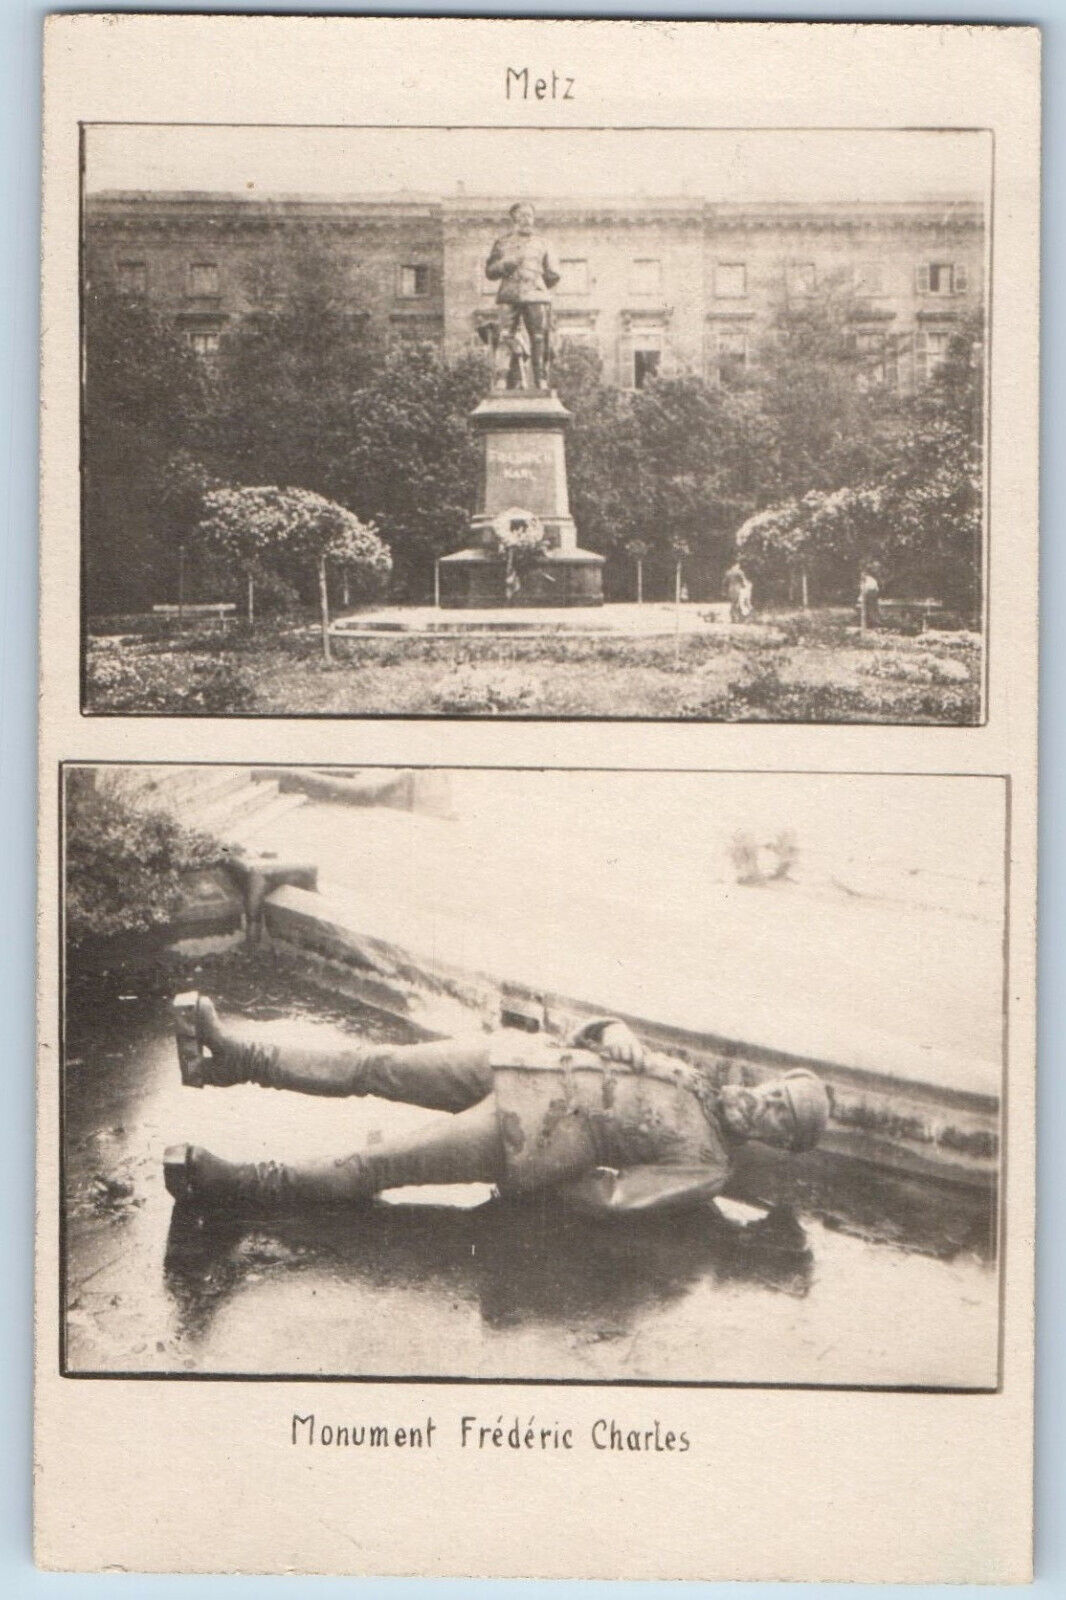 Metz France Postcard Frederic Charles Monument End of WW1 1918 RPPC Photo